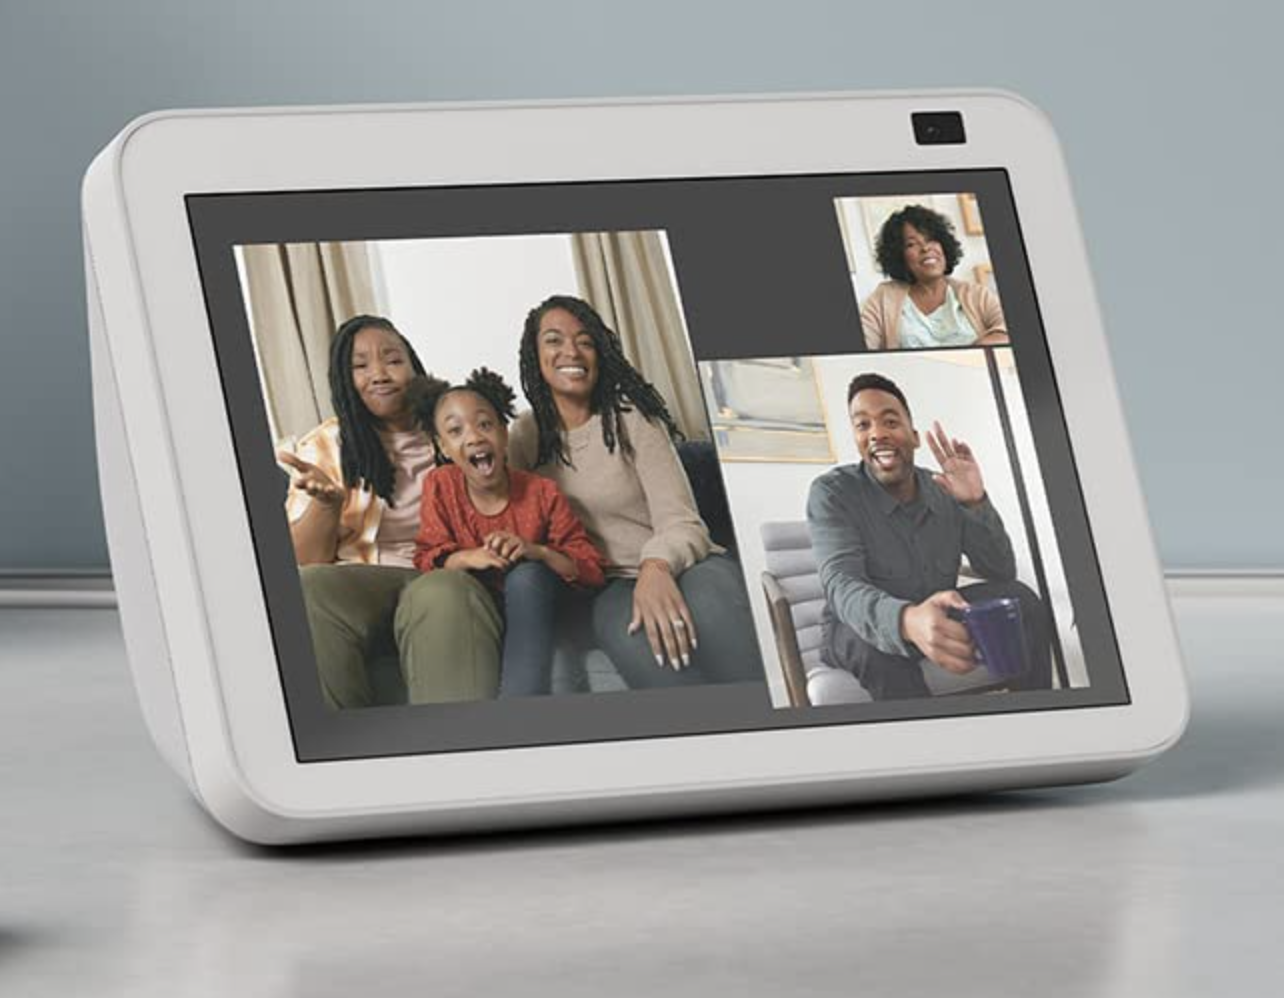 a family making a video call on the device